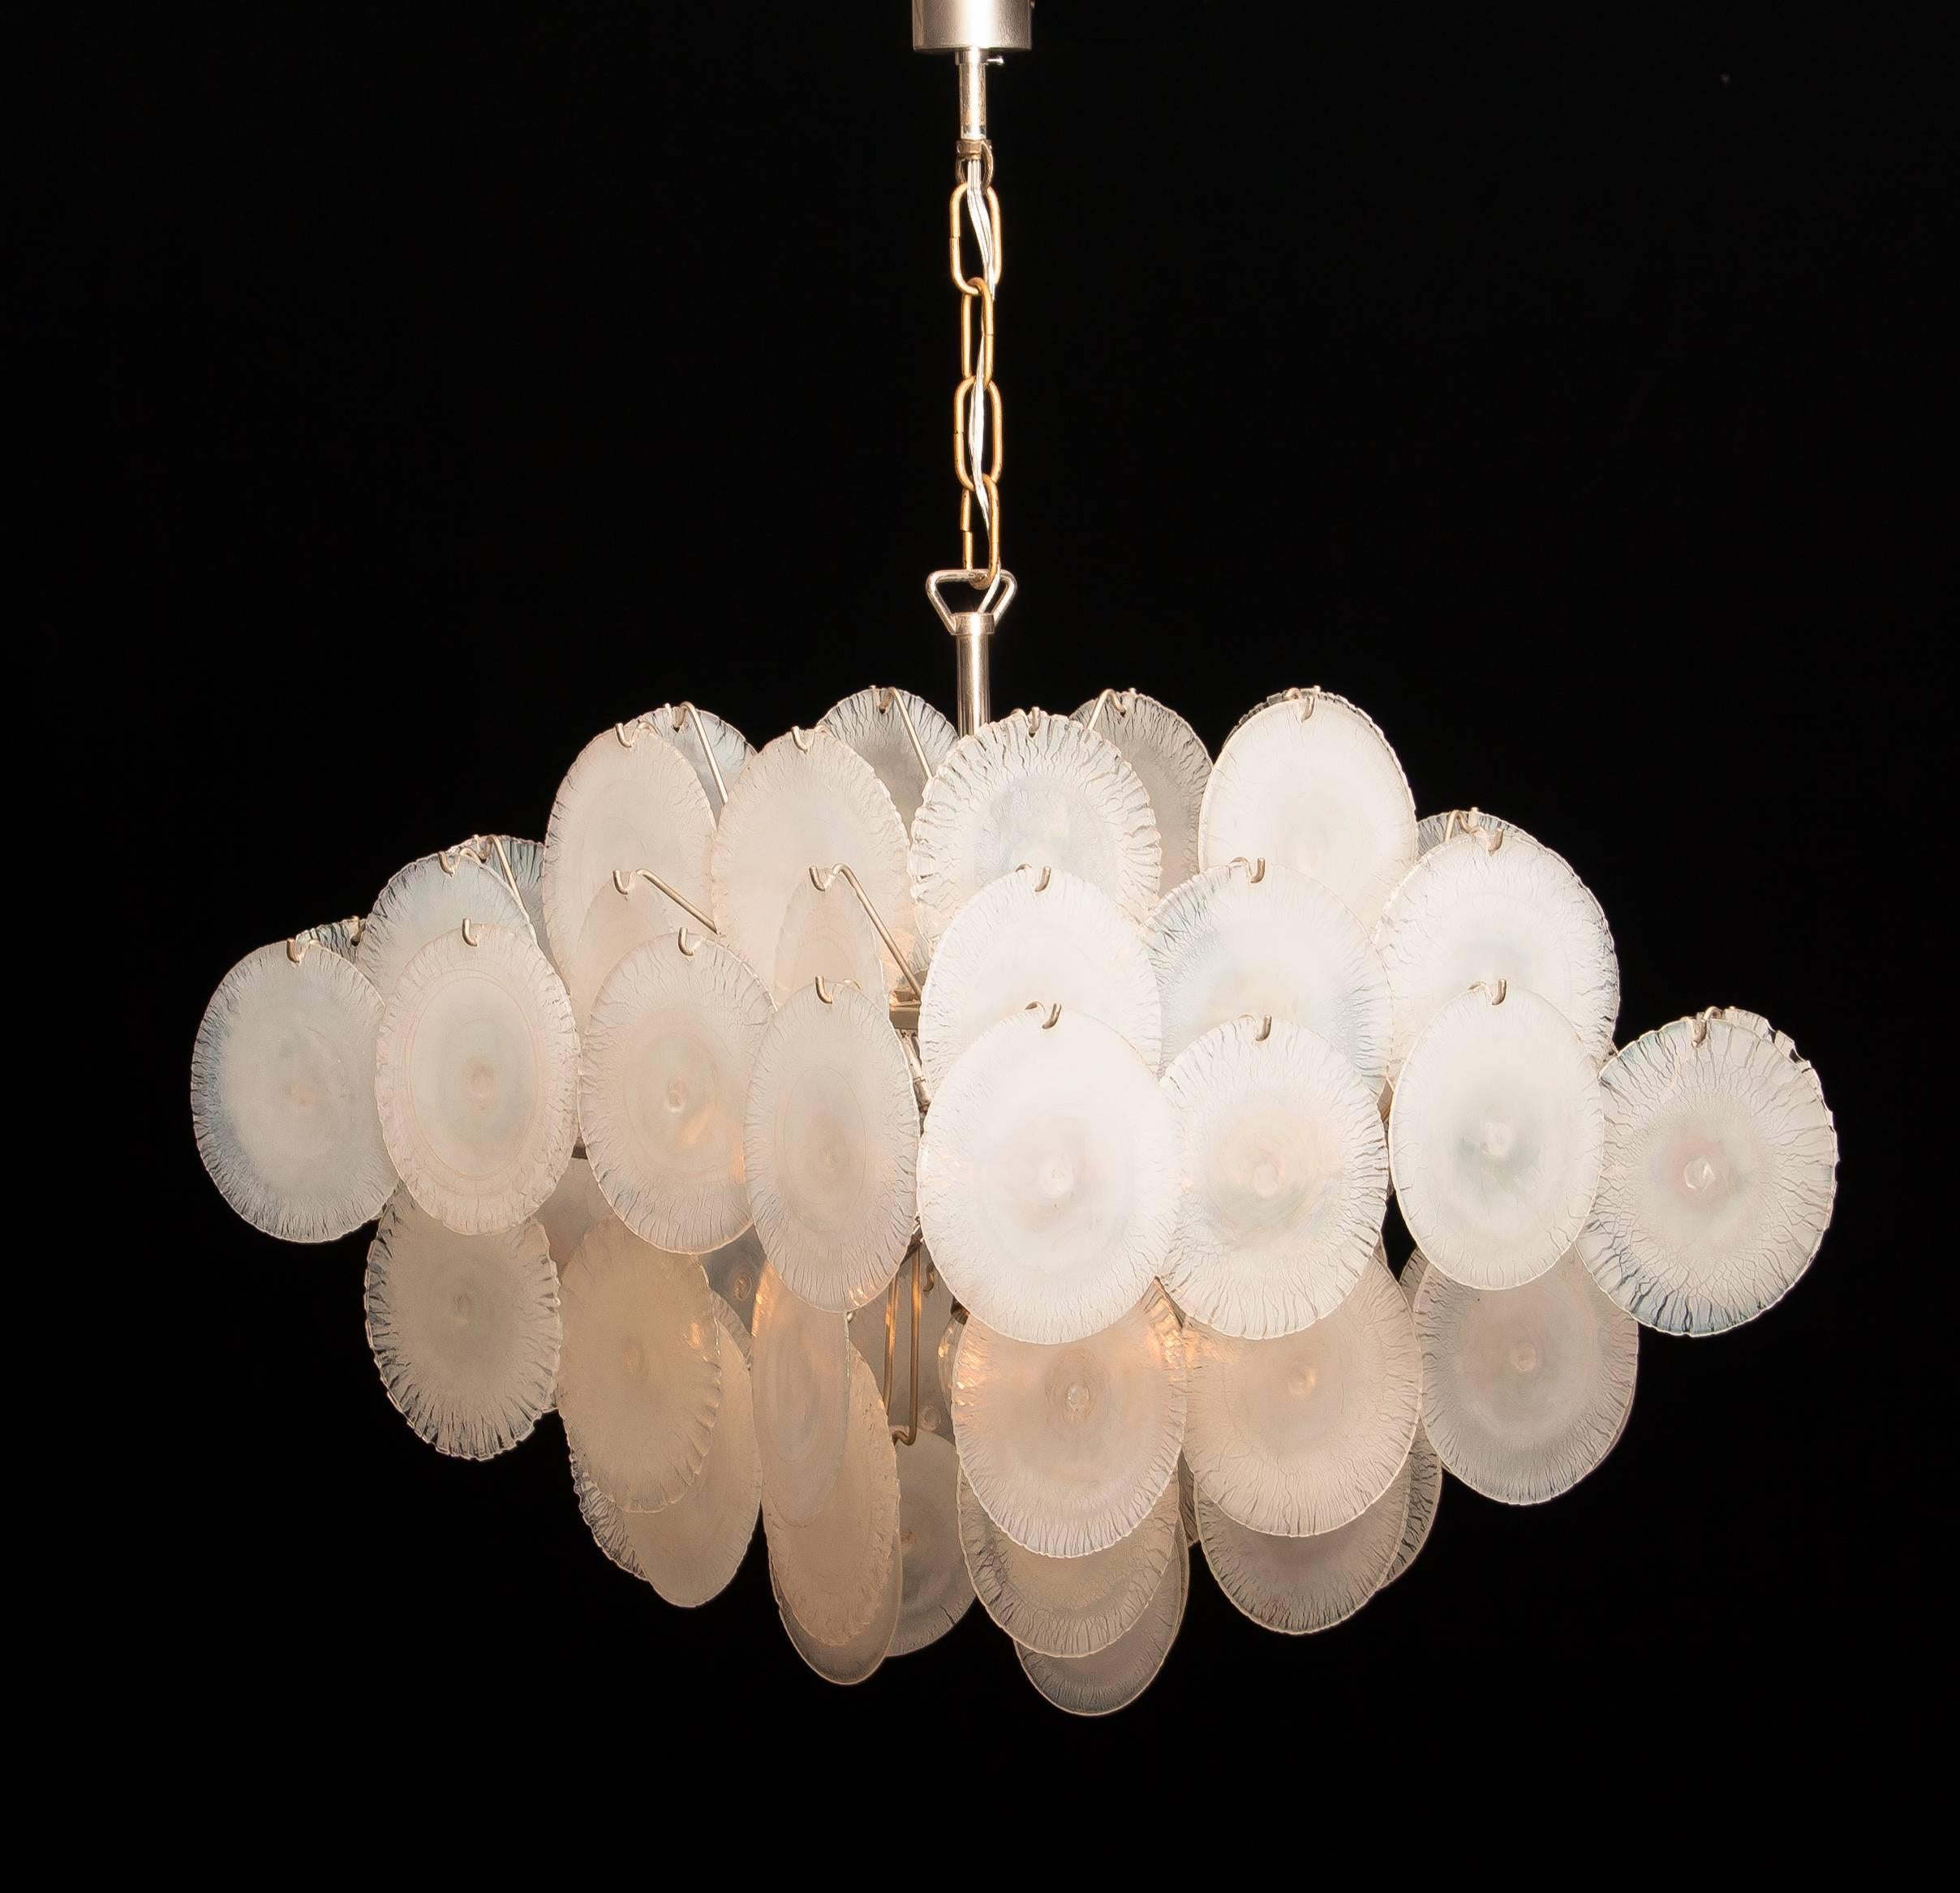 1960s, Set Gino Vistosi Chandeliers with White / Pearl Murano Crystal Discs 11